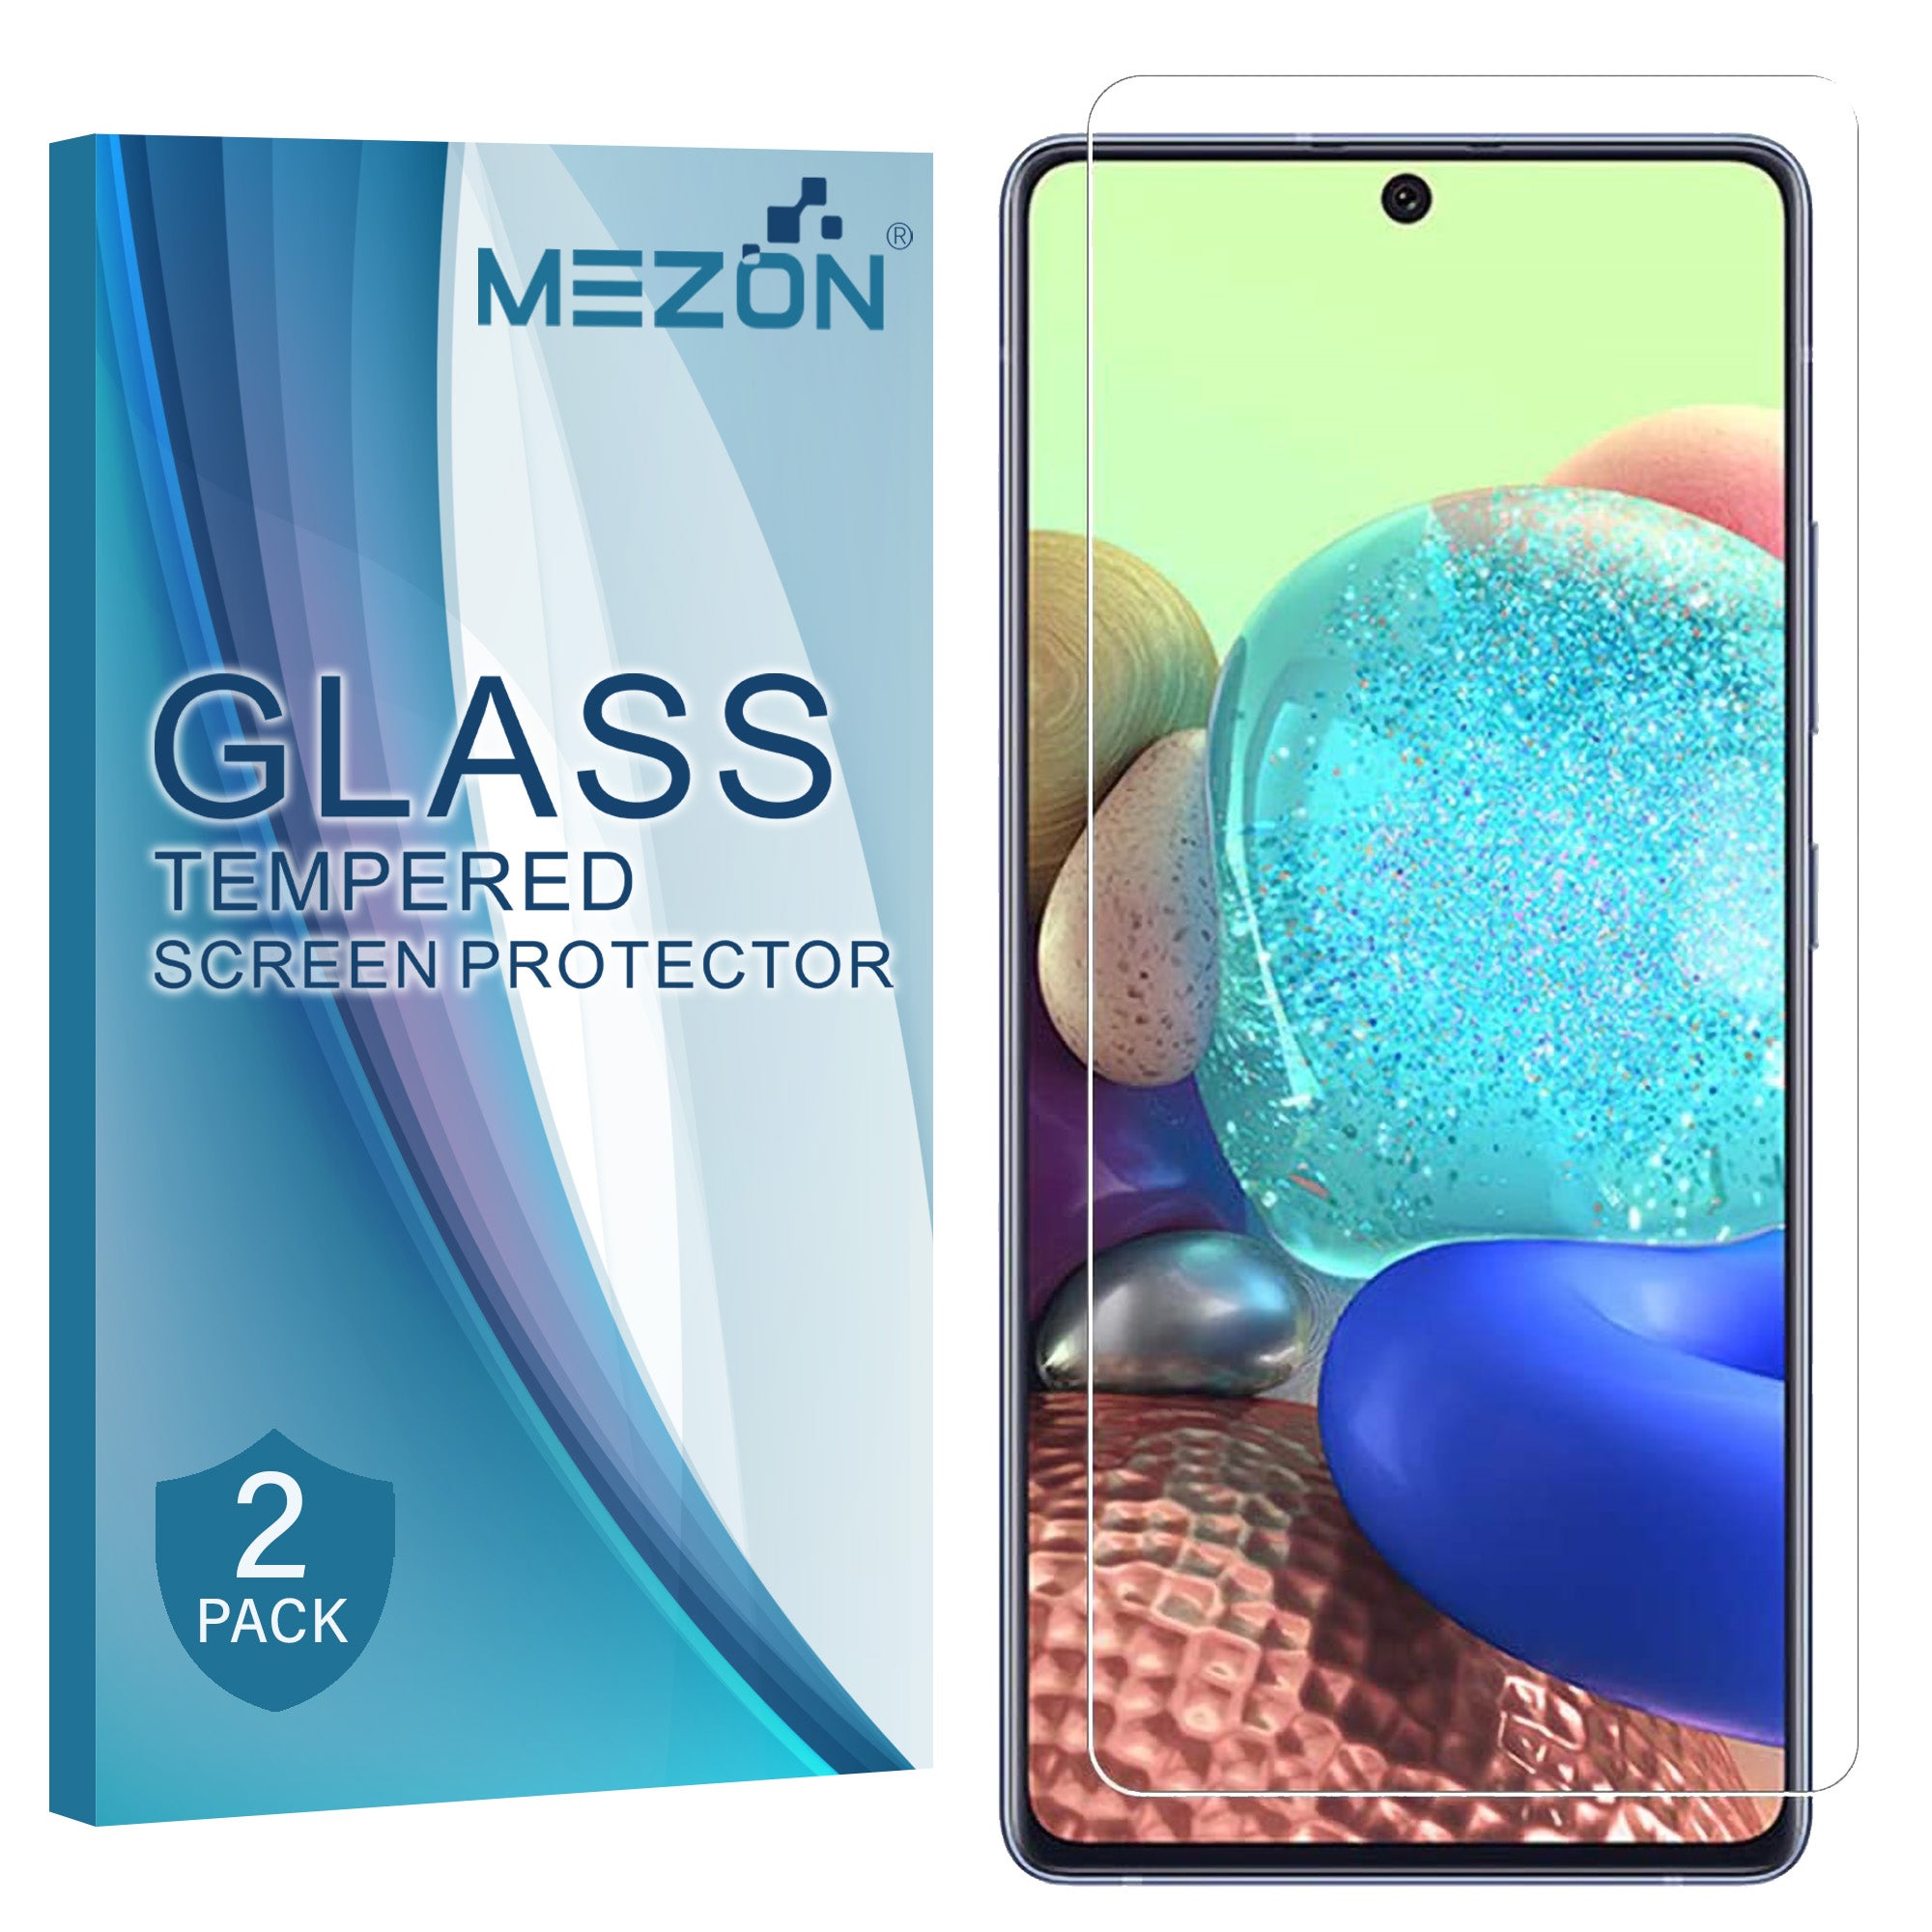 [2 Pack] Samsung Galaxy A71 5G Tempered Glass Crystal Clear Premium 9H HD Screen Protector by MEZON – Case Friendly, Shock Absorption (A71 5G, 9H)